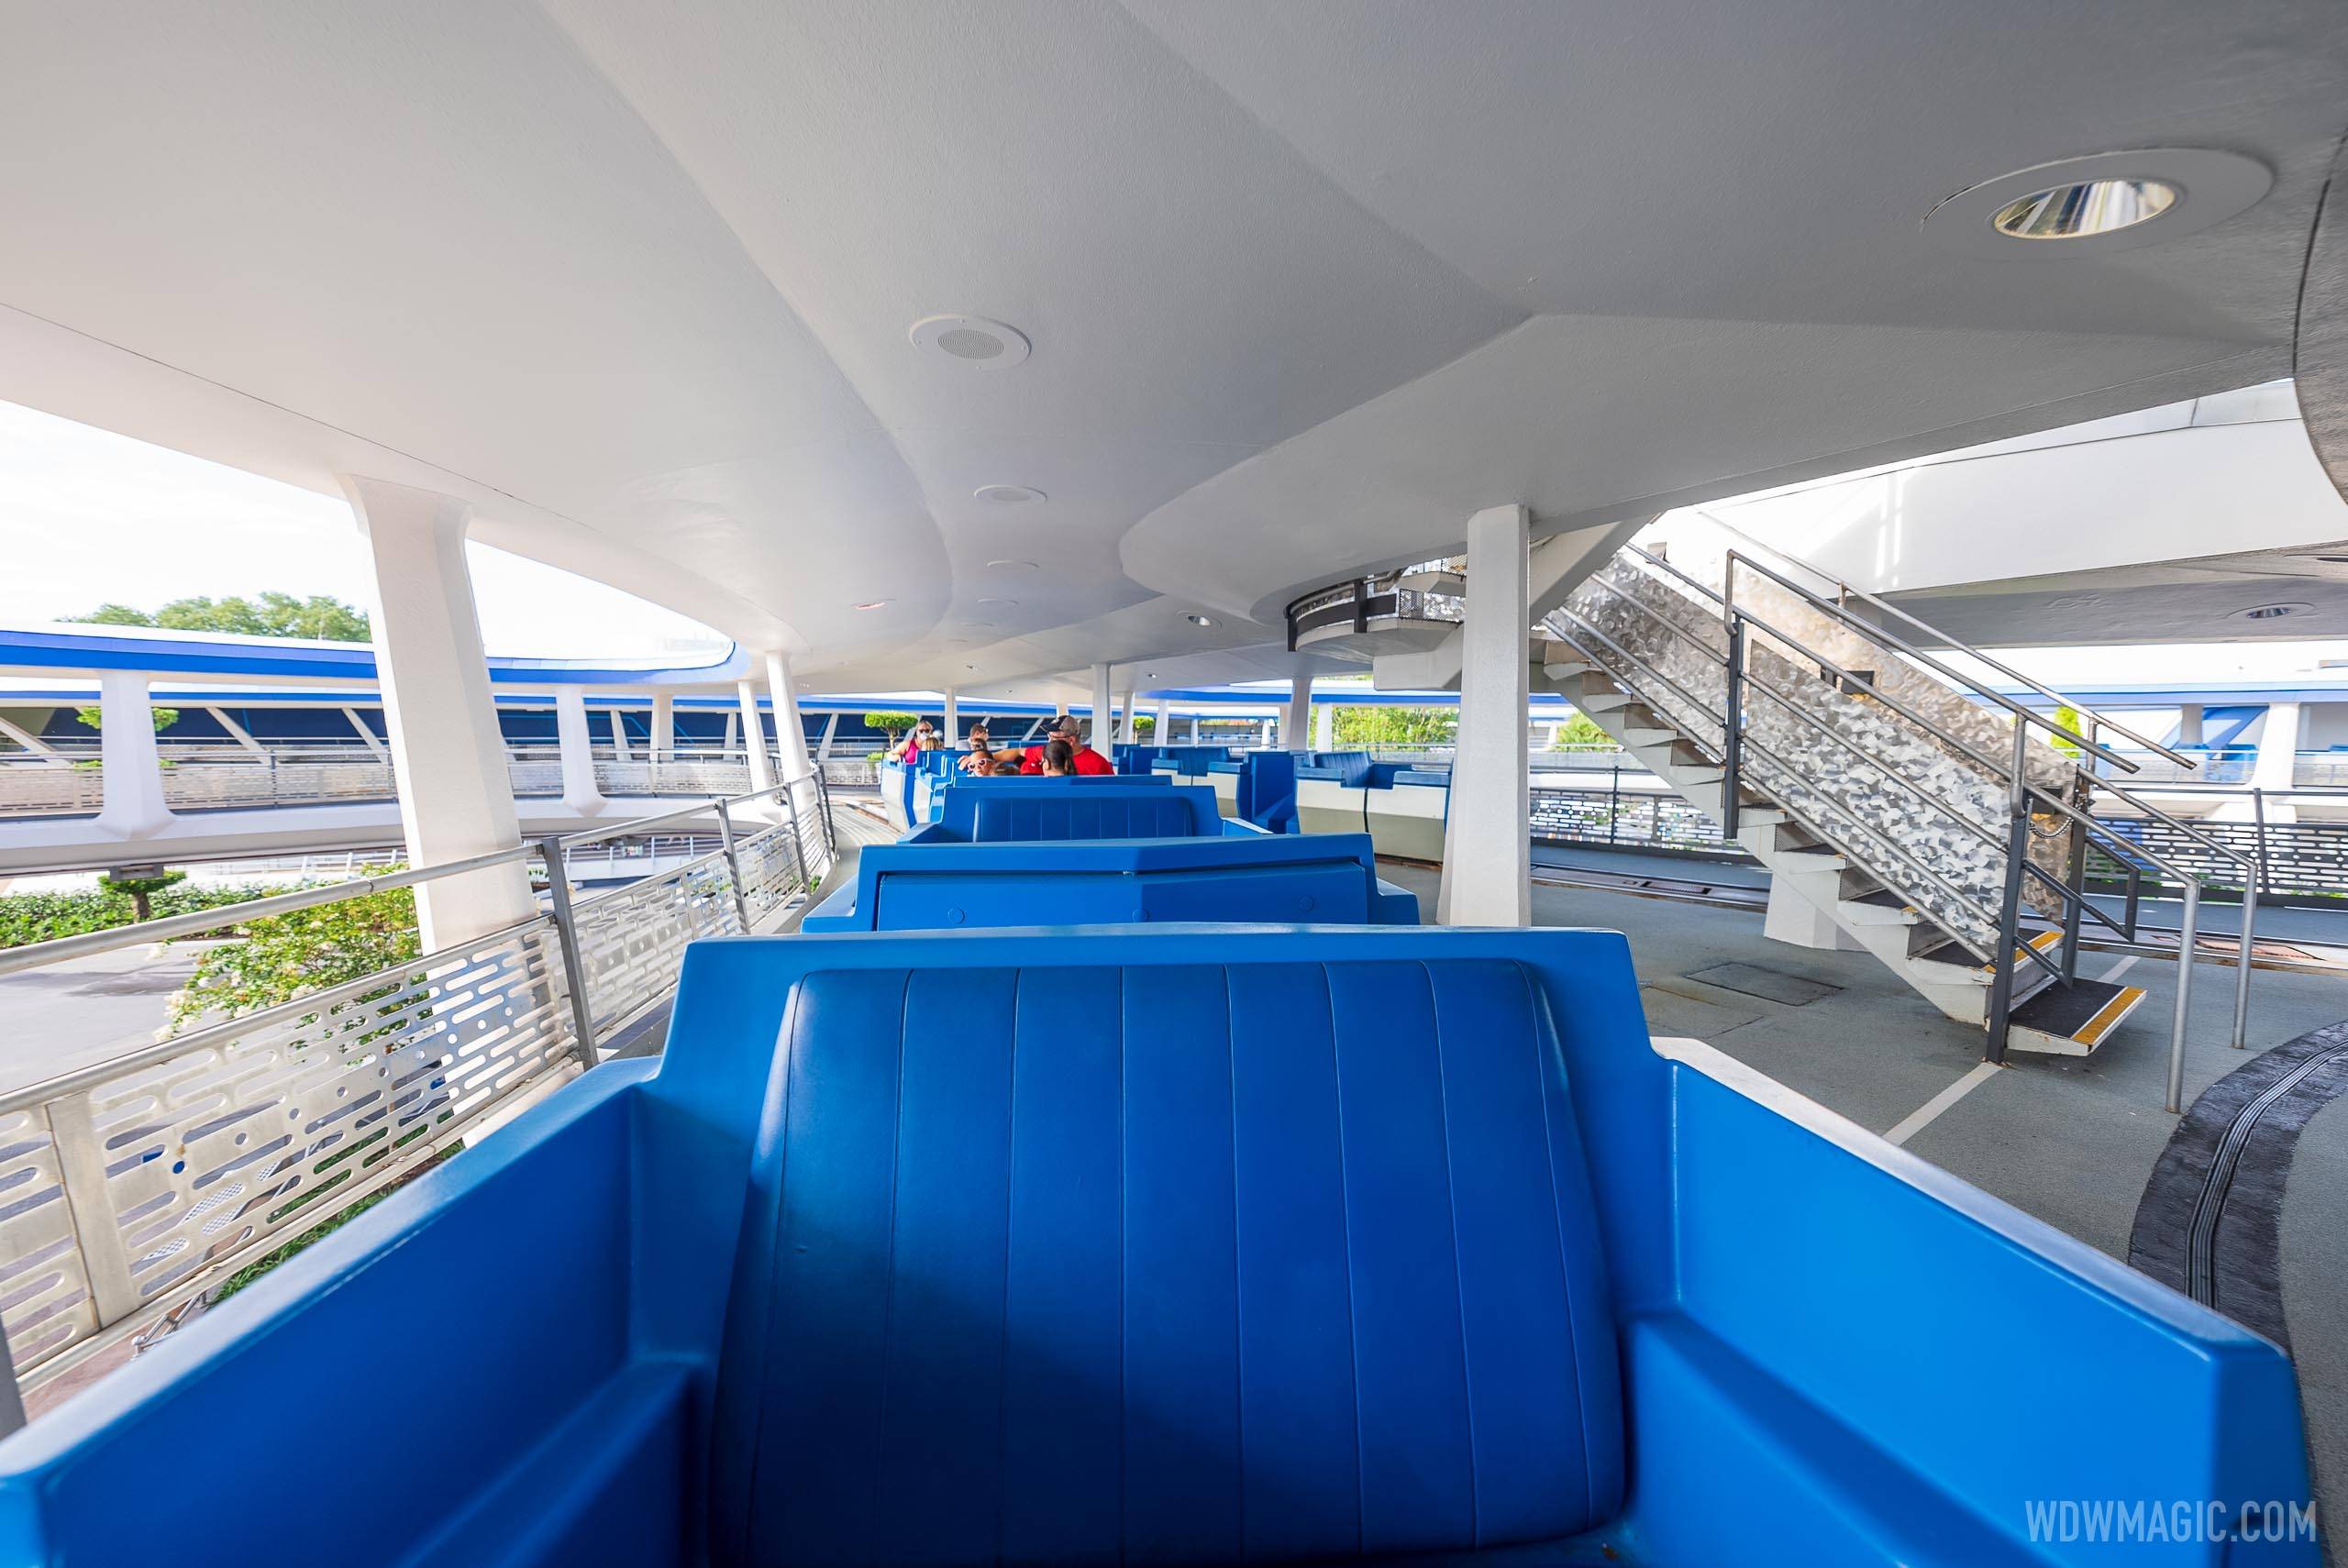 Tomorrowland Transit Authority renamed to the 'Tomorrowland Transit Authority PeopleMover'